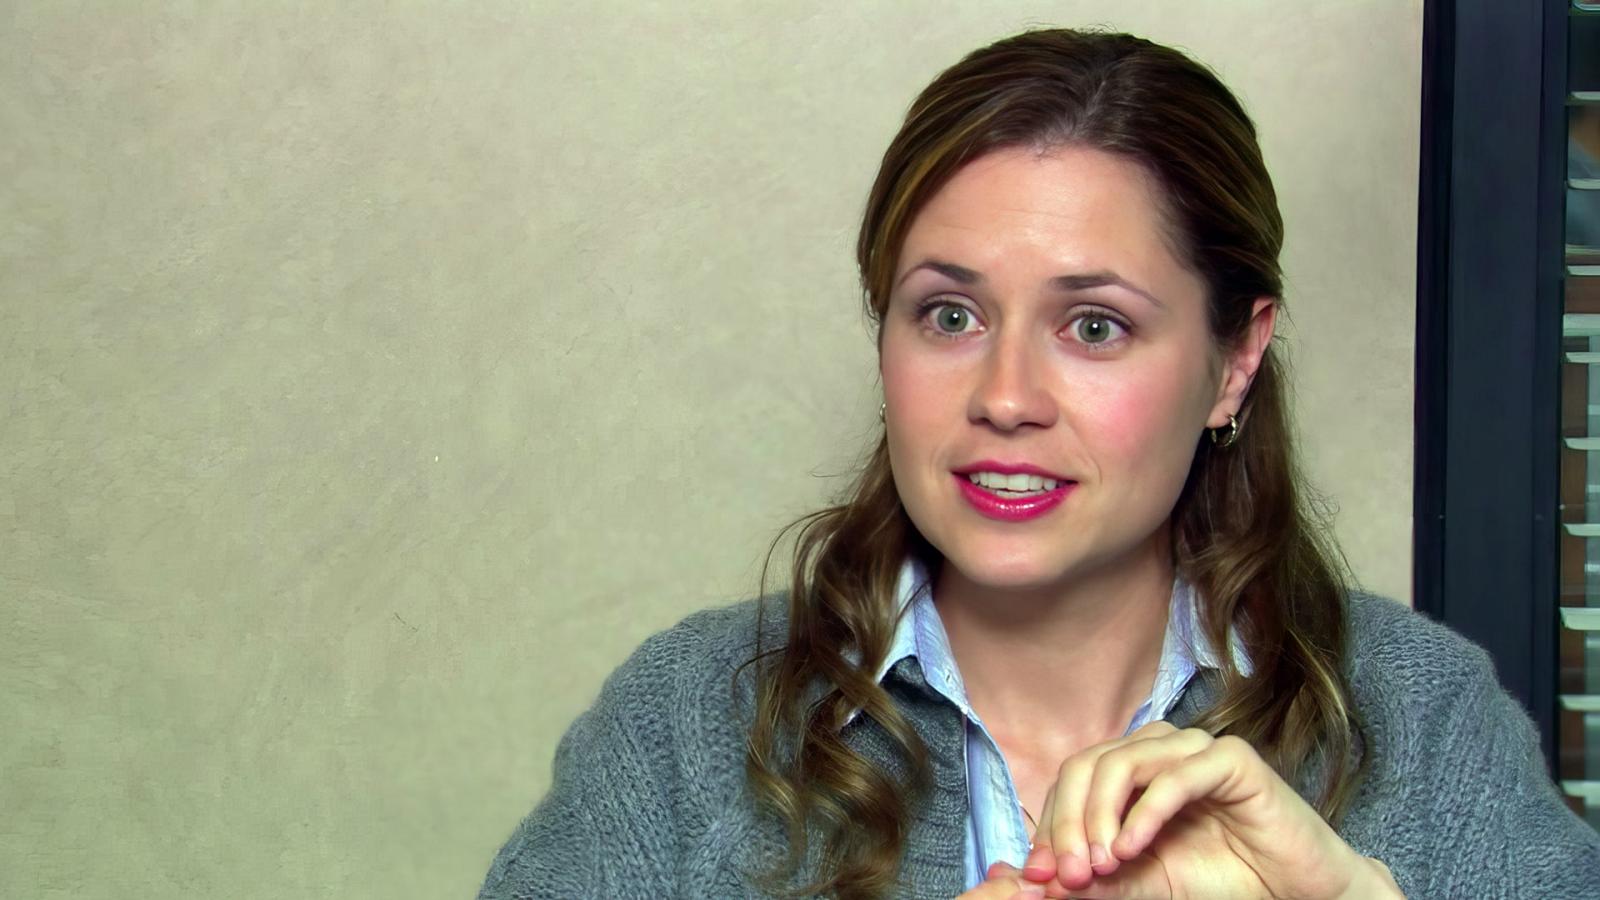 Find Out Which 'The Office' Employee You Are Based on Your Zodiac Sign - image 4